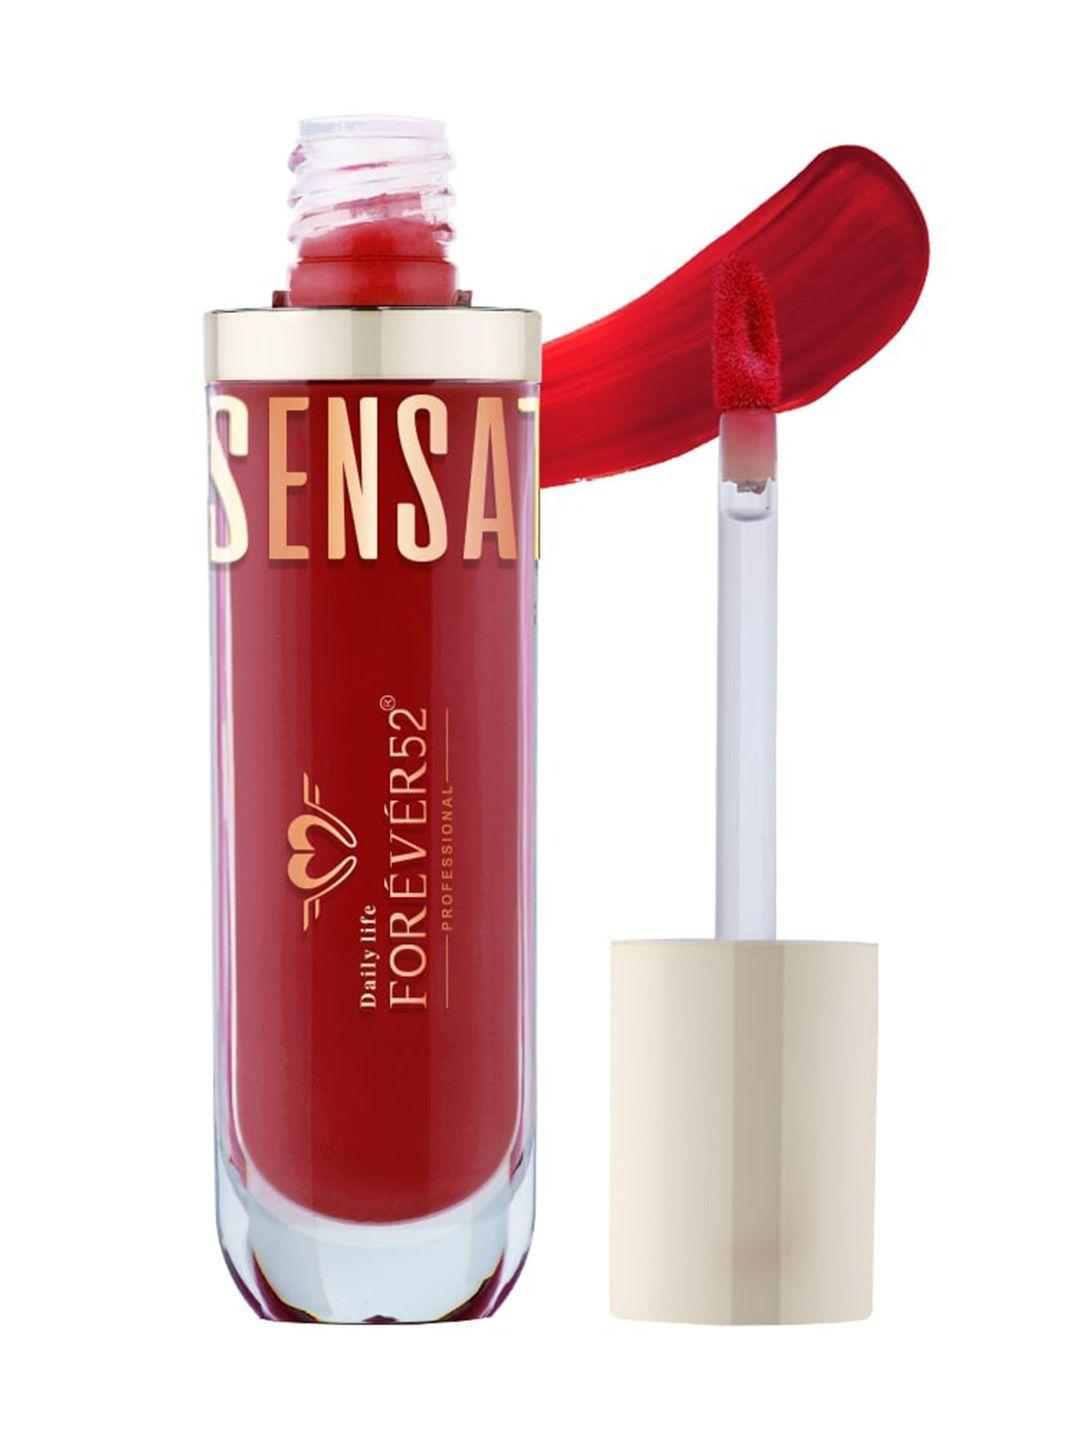 daily life forever52 sensational long lasting liquid lipstick 6ml - the indian bride 014